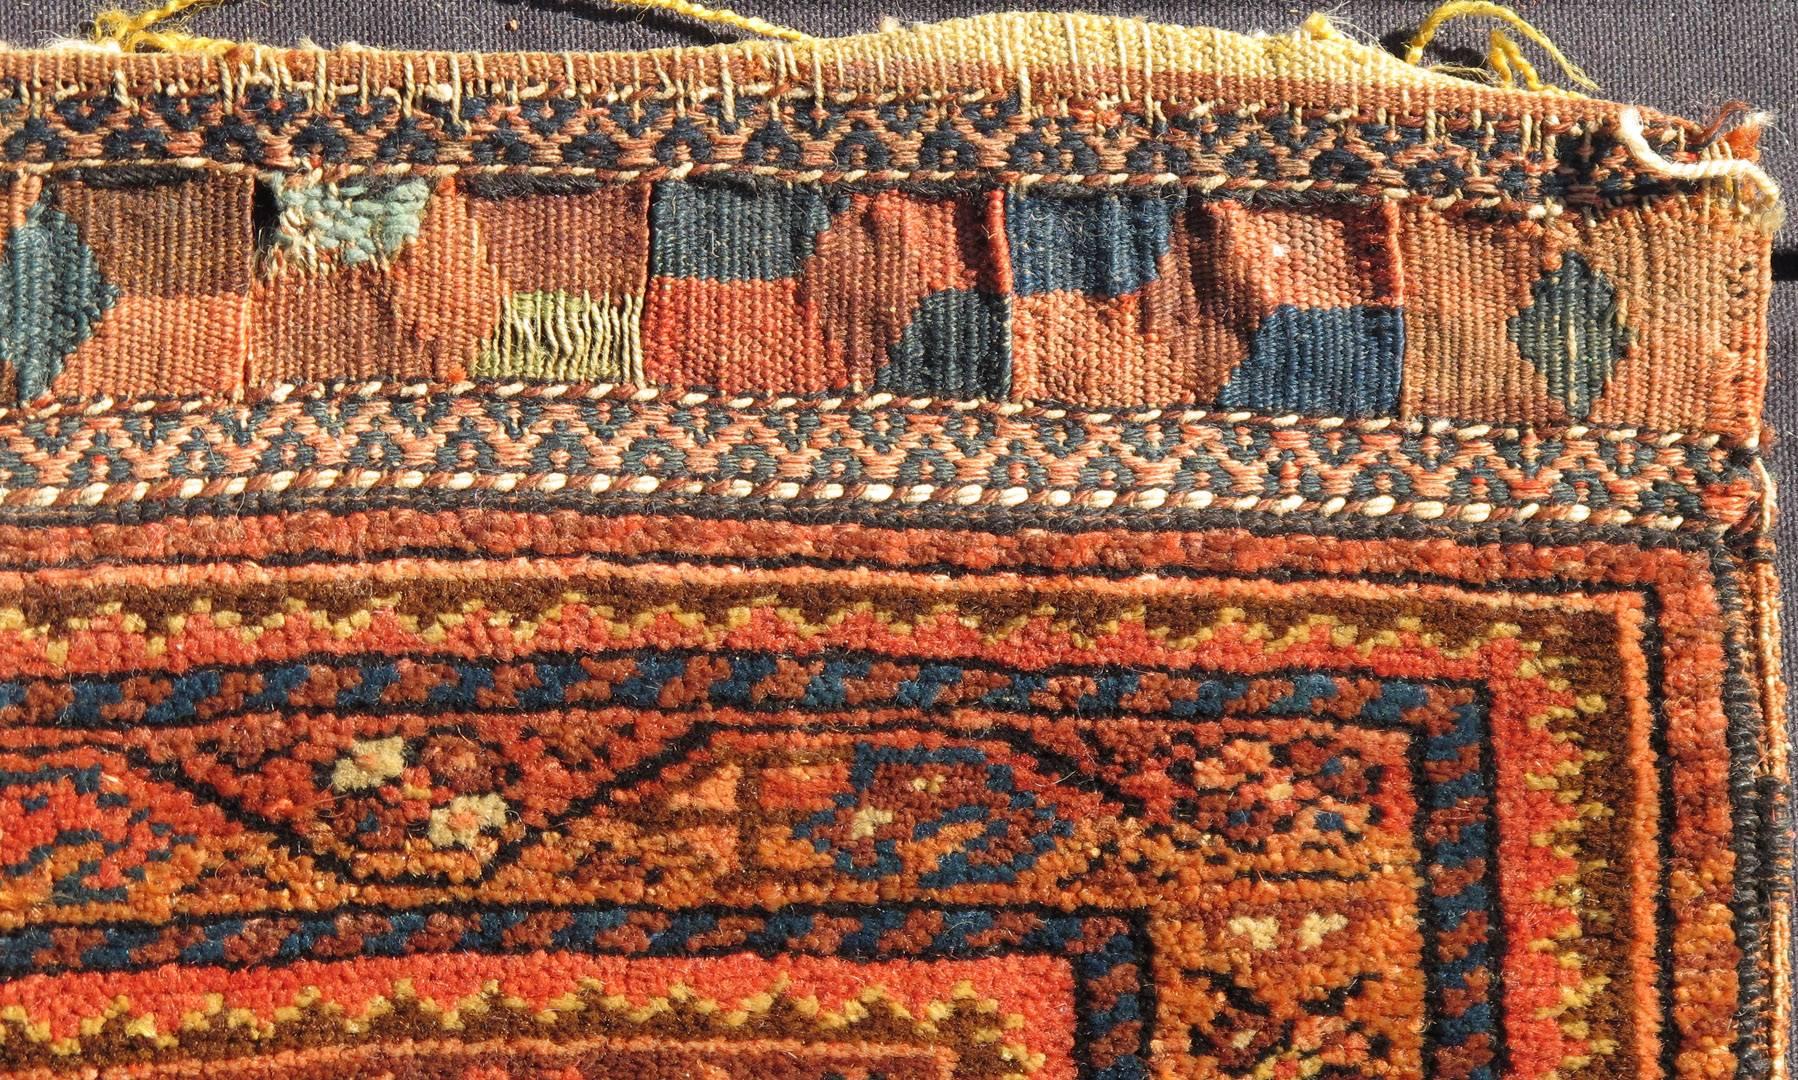 Antique Persian two-panel Qashqai rug with medallion design in orange and brown, rug 10-90511, country of origin / type: Iran / Qashqai, circa 1880

The Qashgai nomads are found in the Fars province in southwest Iran. They move twice a year,